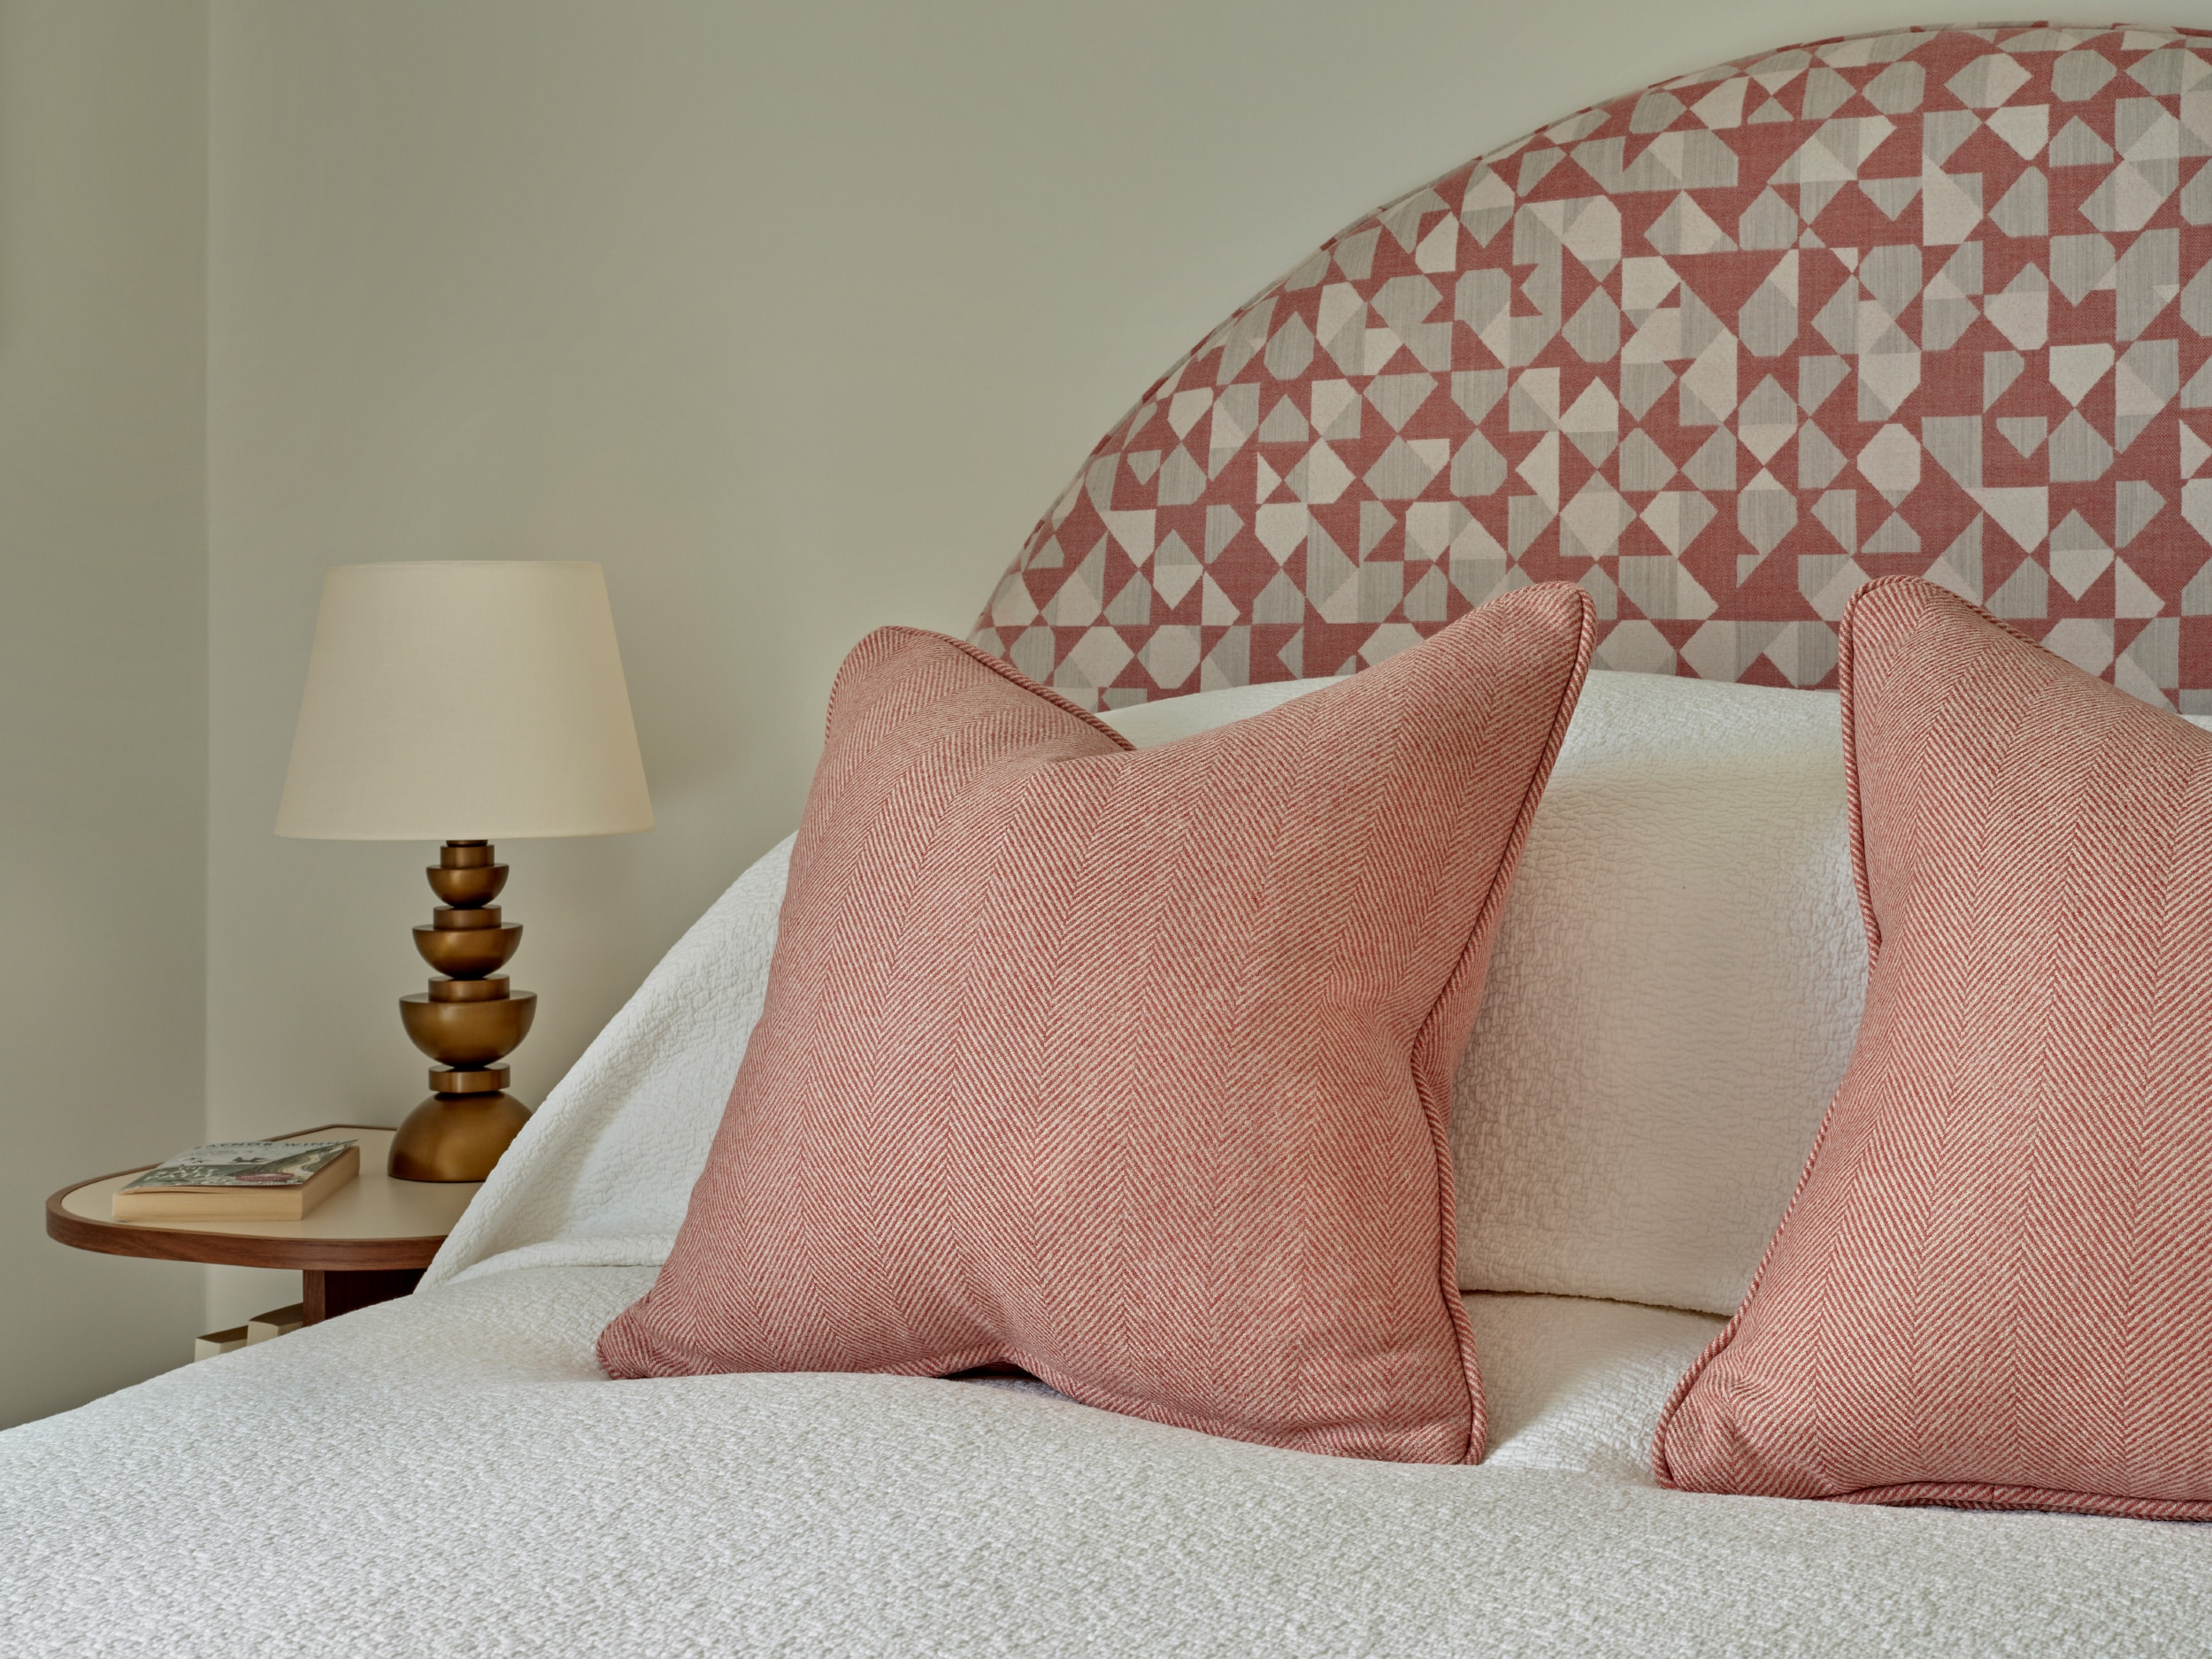 andrew martin scatter cushions on bed to give a little colour to the neutral tones of the bed linen.